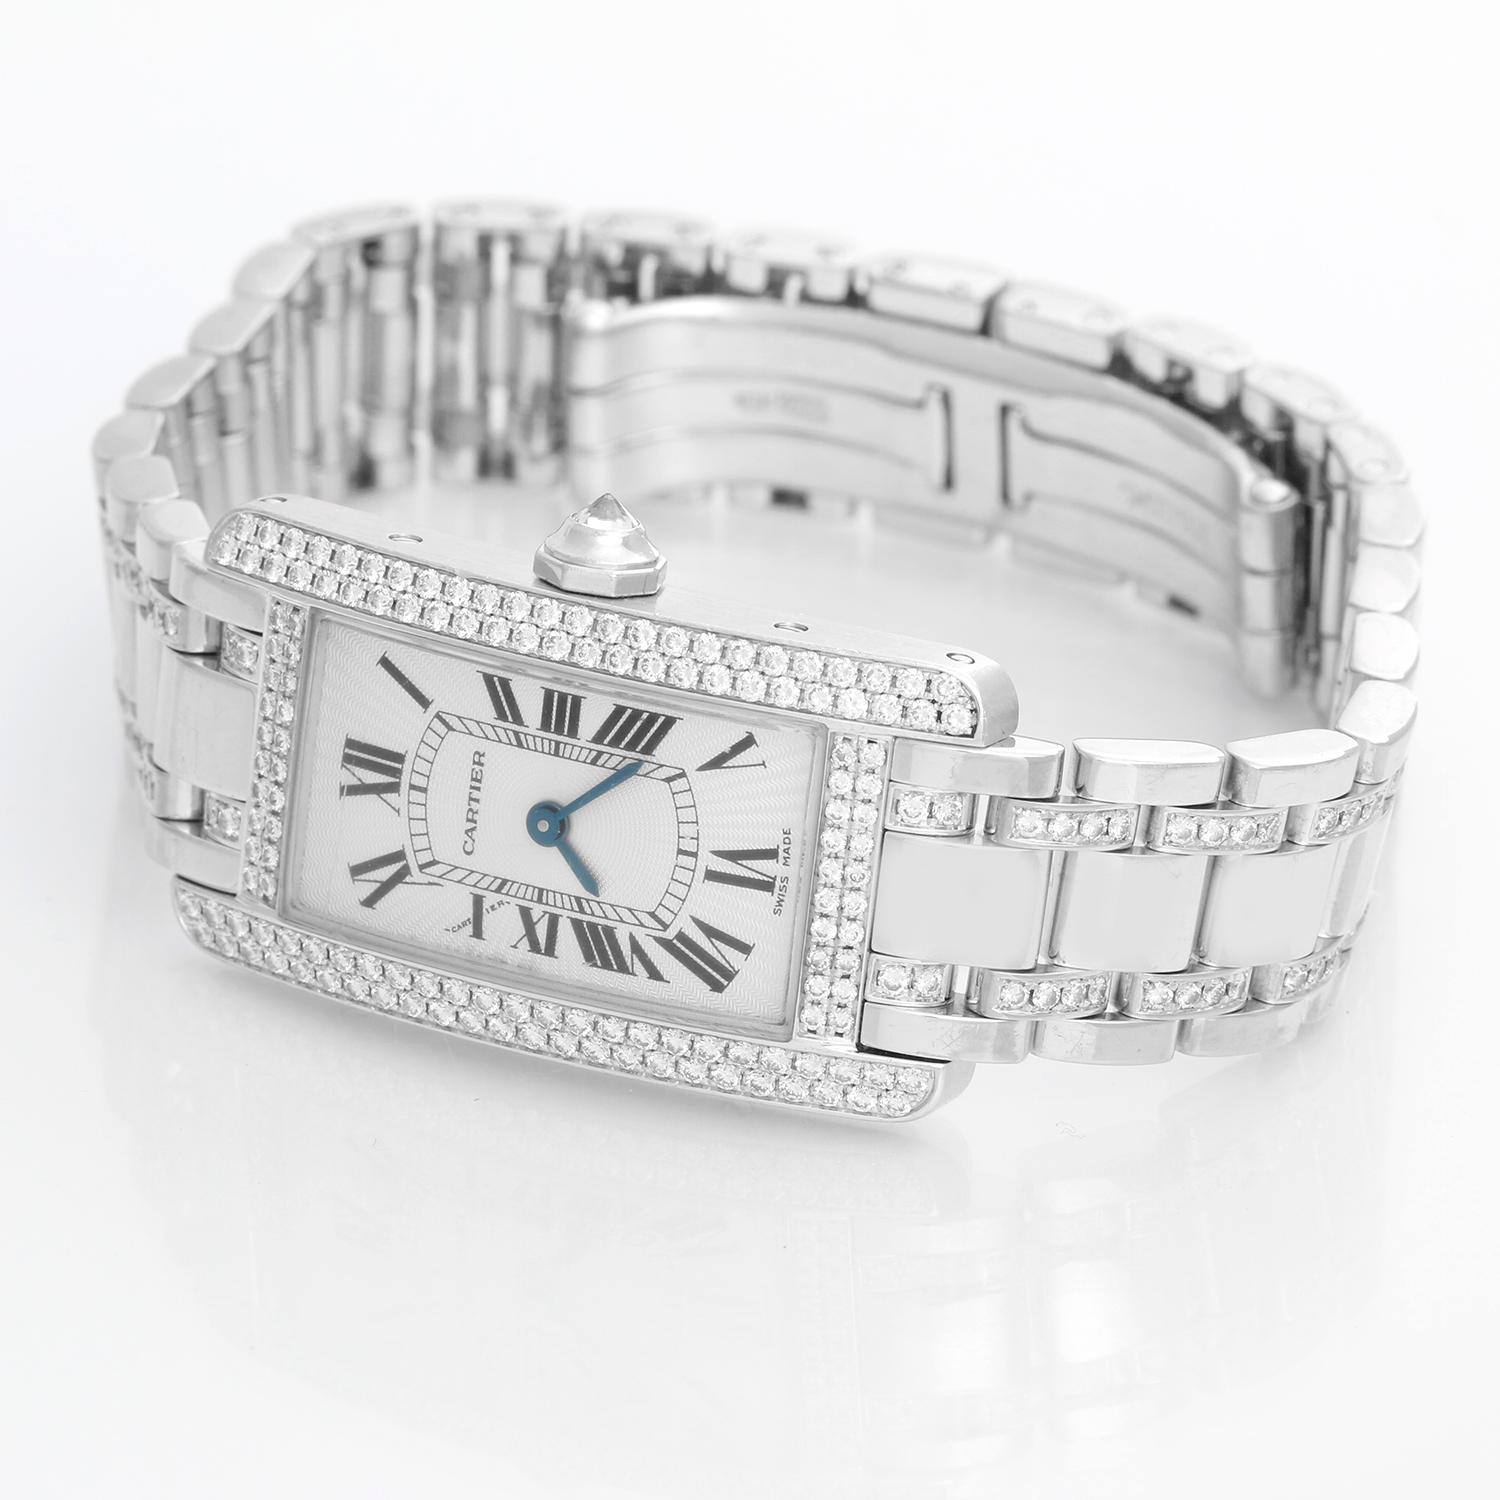 Cartier Tank Americaine (or American) Ladies White Gold Diamond Watch WB7018L1 - Quartz movement. 18k white gold case with 2-row factory diamond bezel  (19 mm x 35 mm ). Silver colored with black Roman numerals. 18k white gold Cartier bracelet with